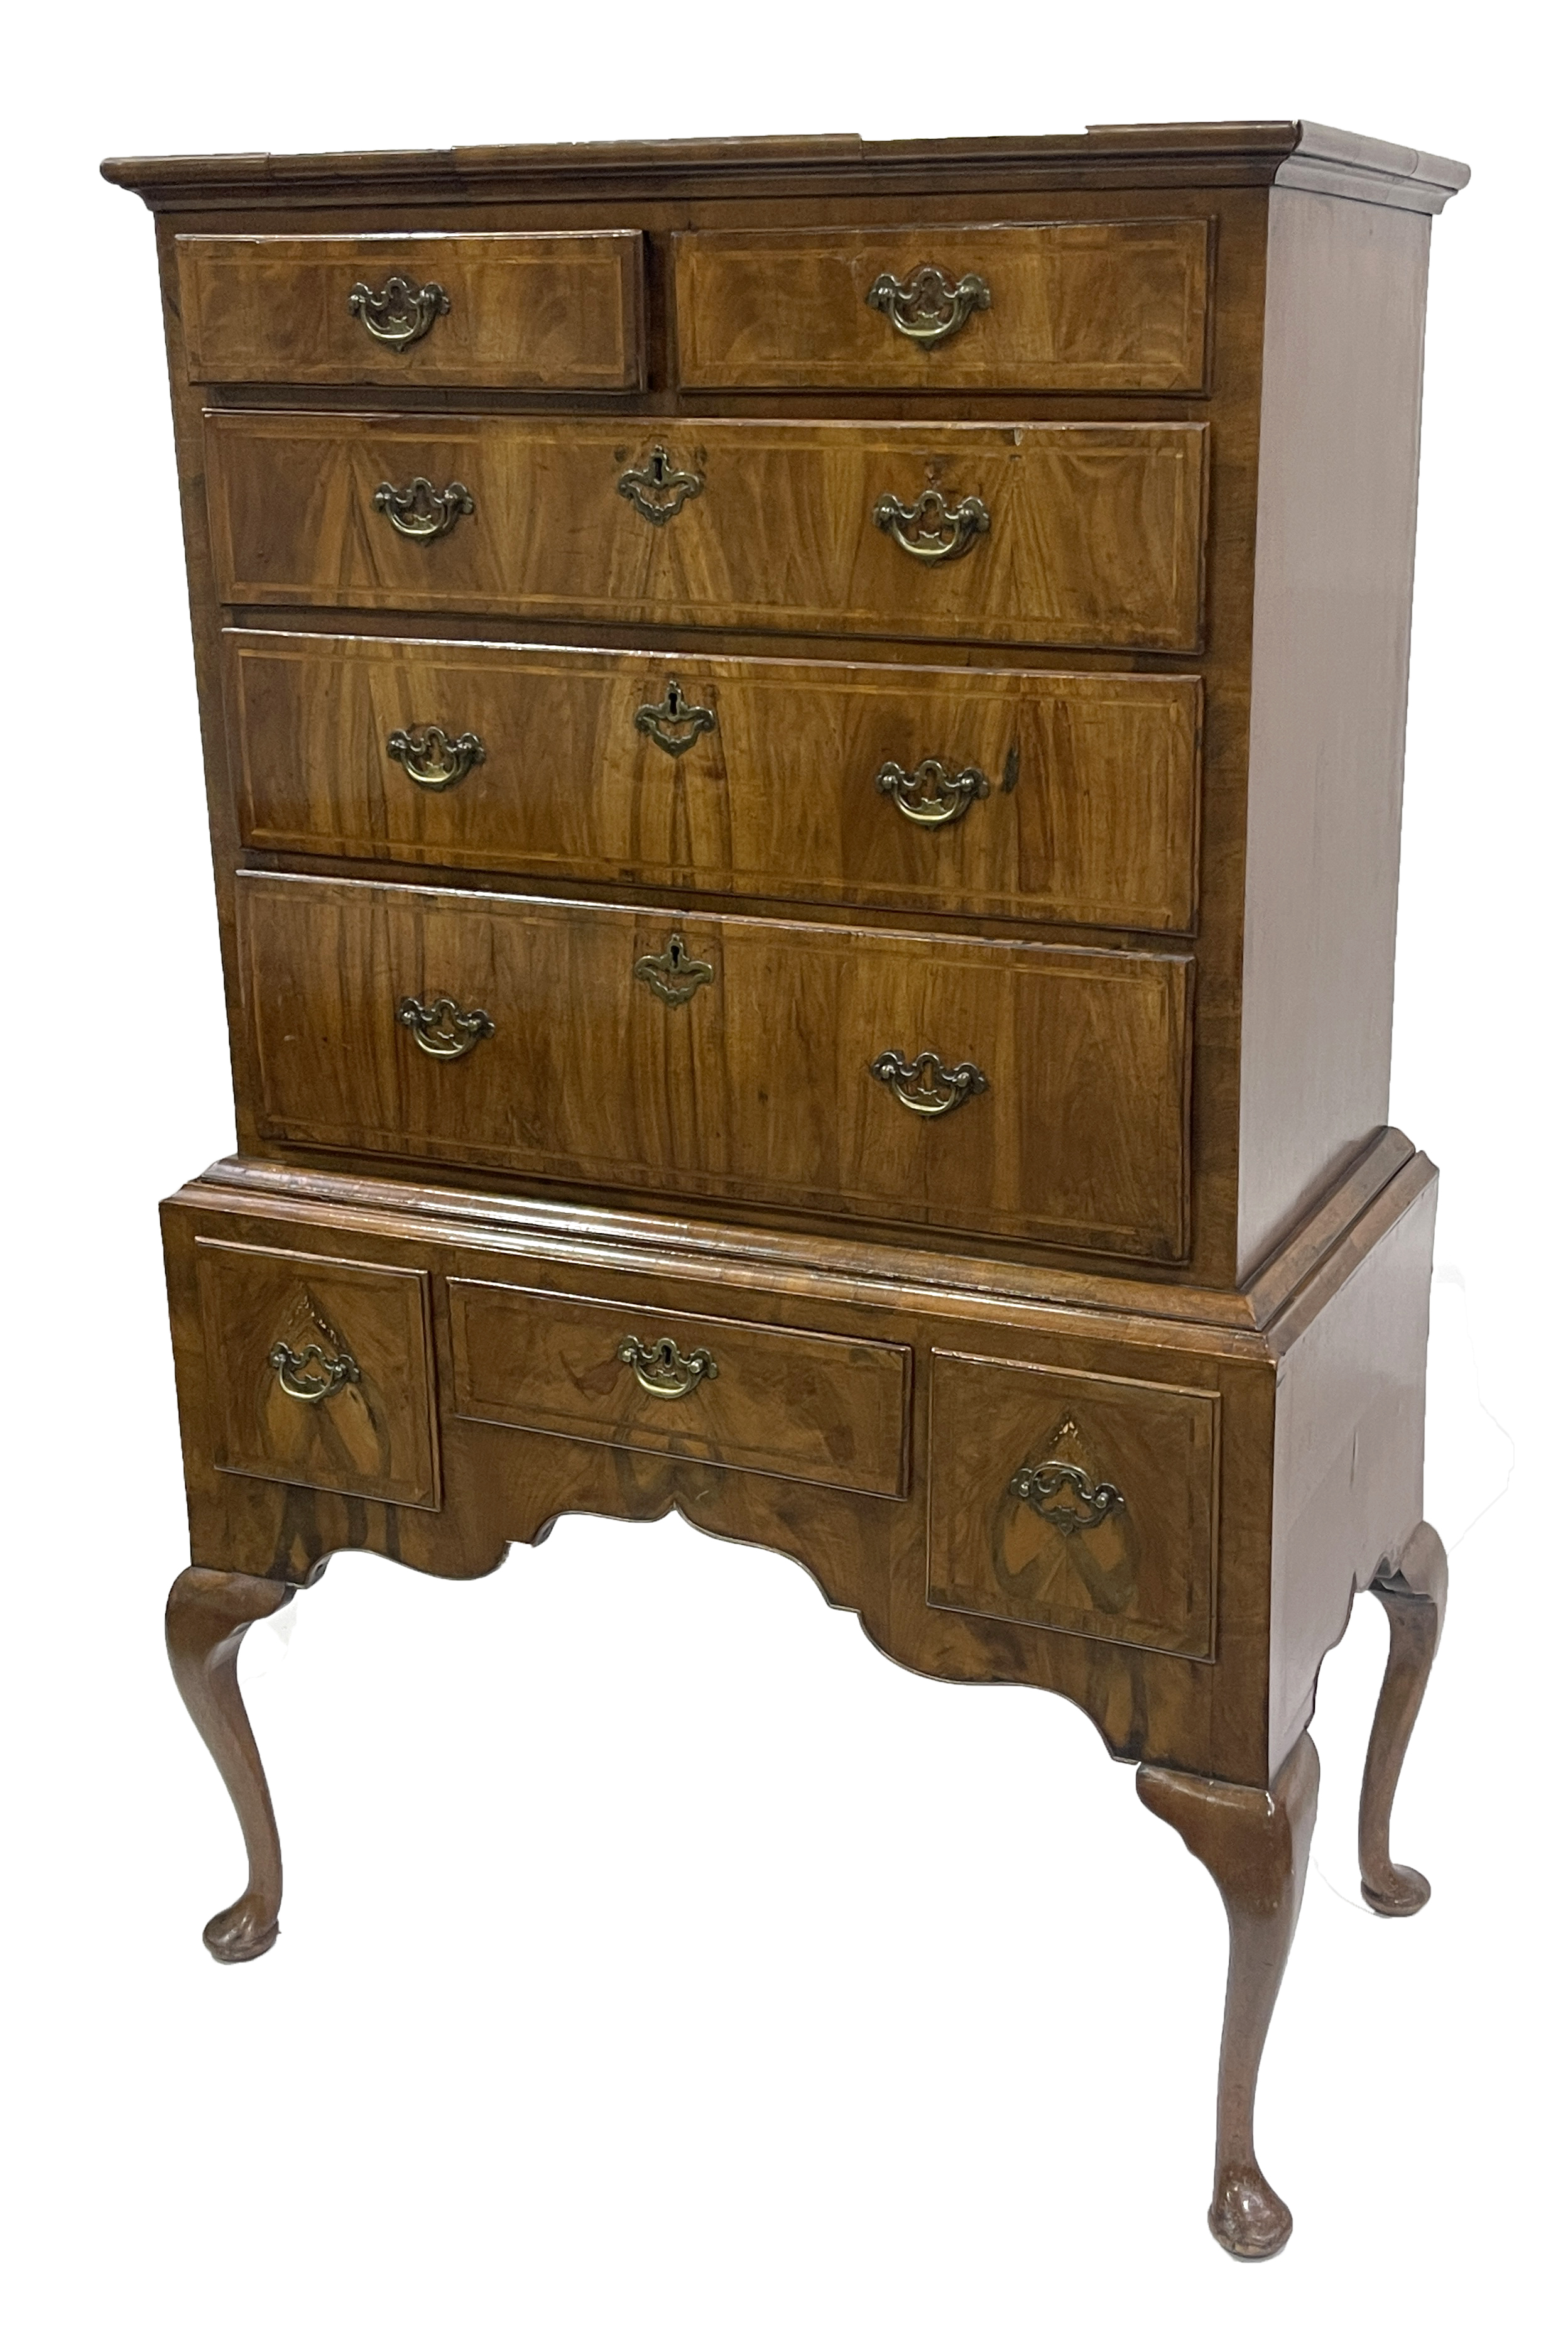 A George III figured walnut and crossbanded chest